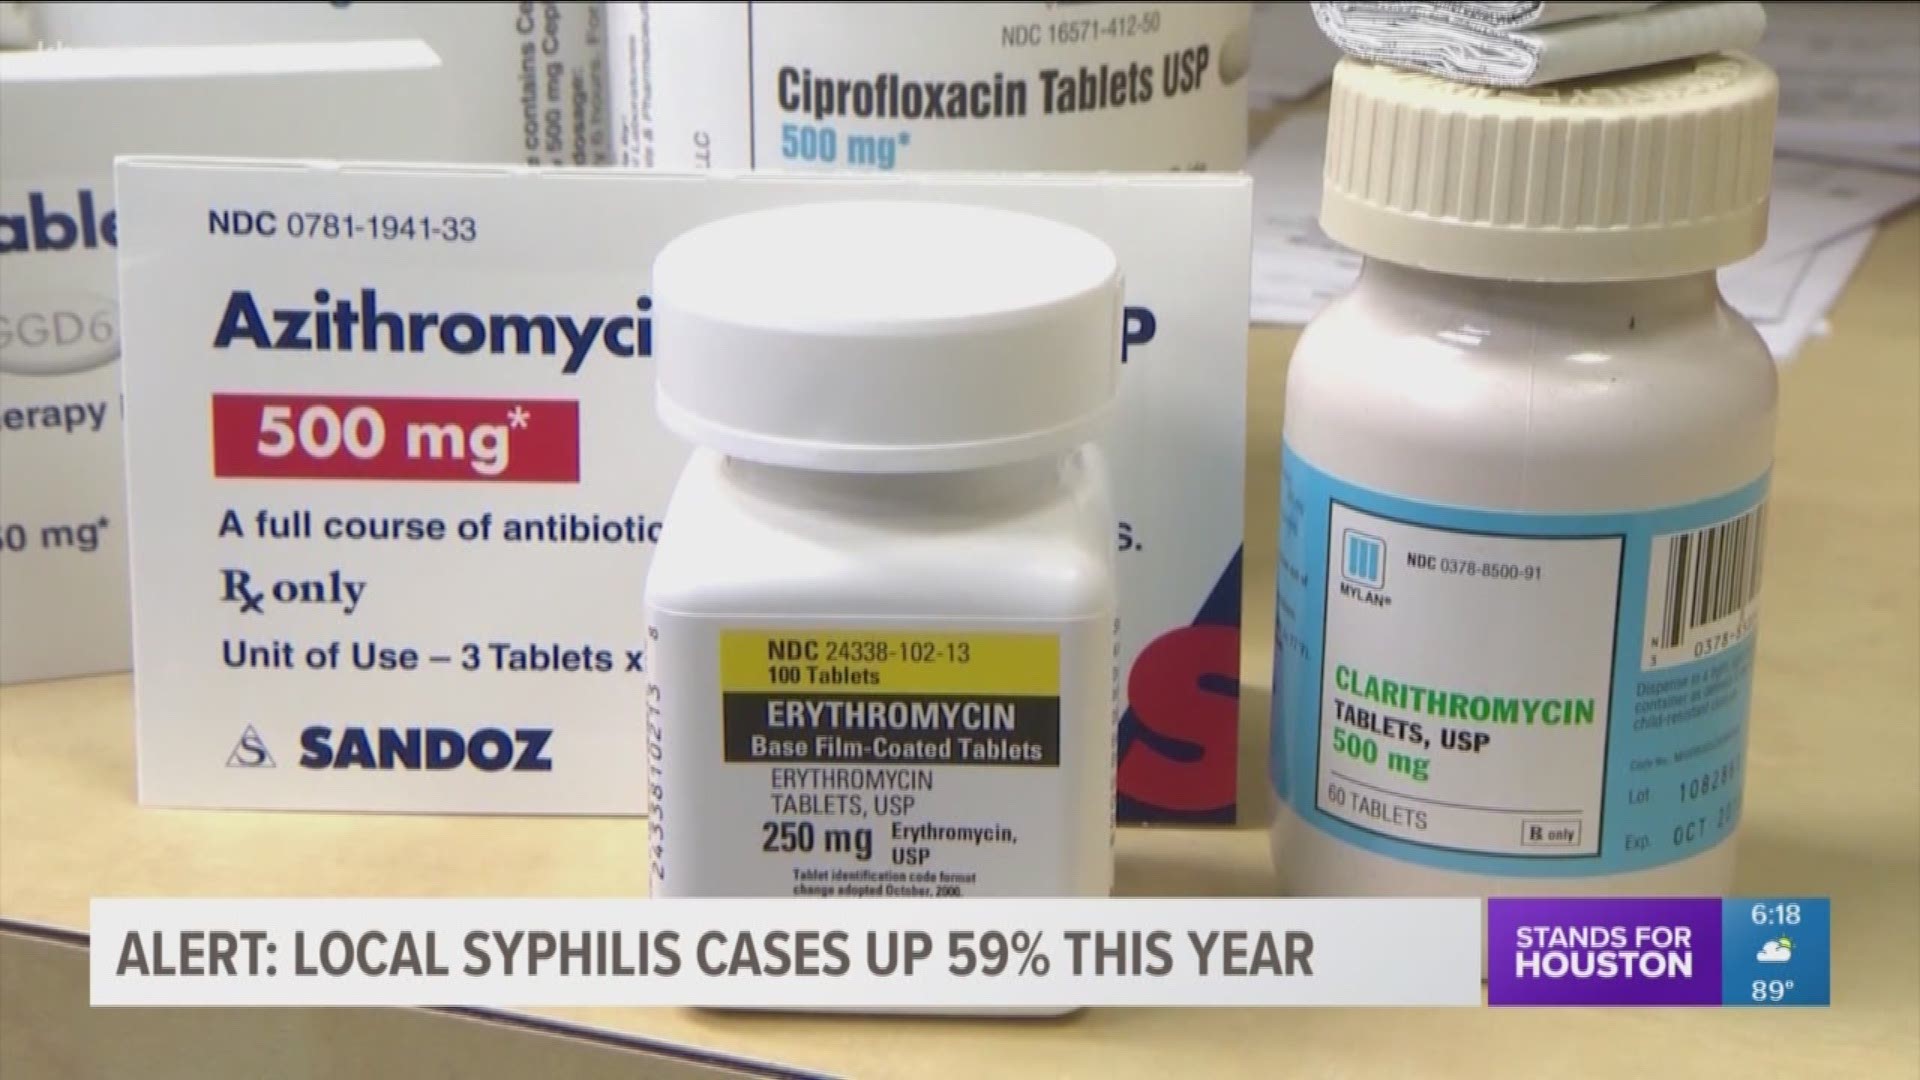 It's a startling health alert from city and county authorities noticing a sharp spike in syphilis cases.